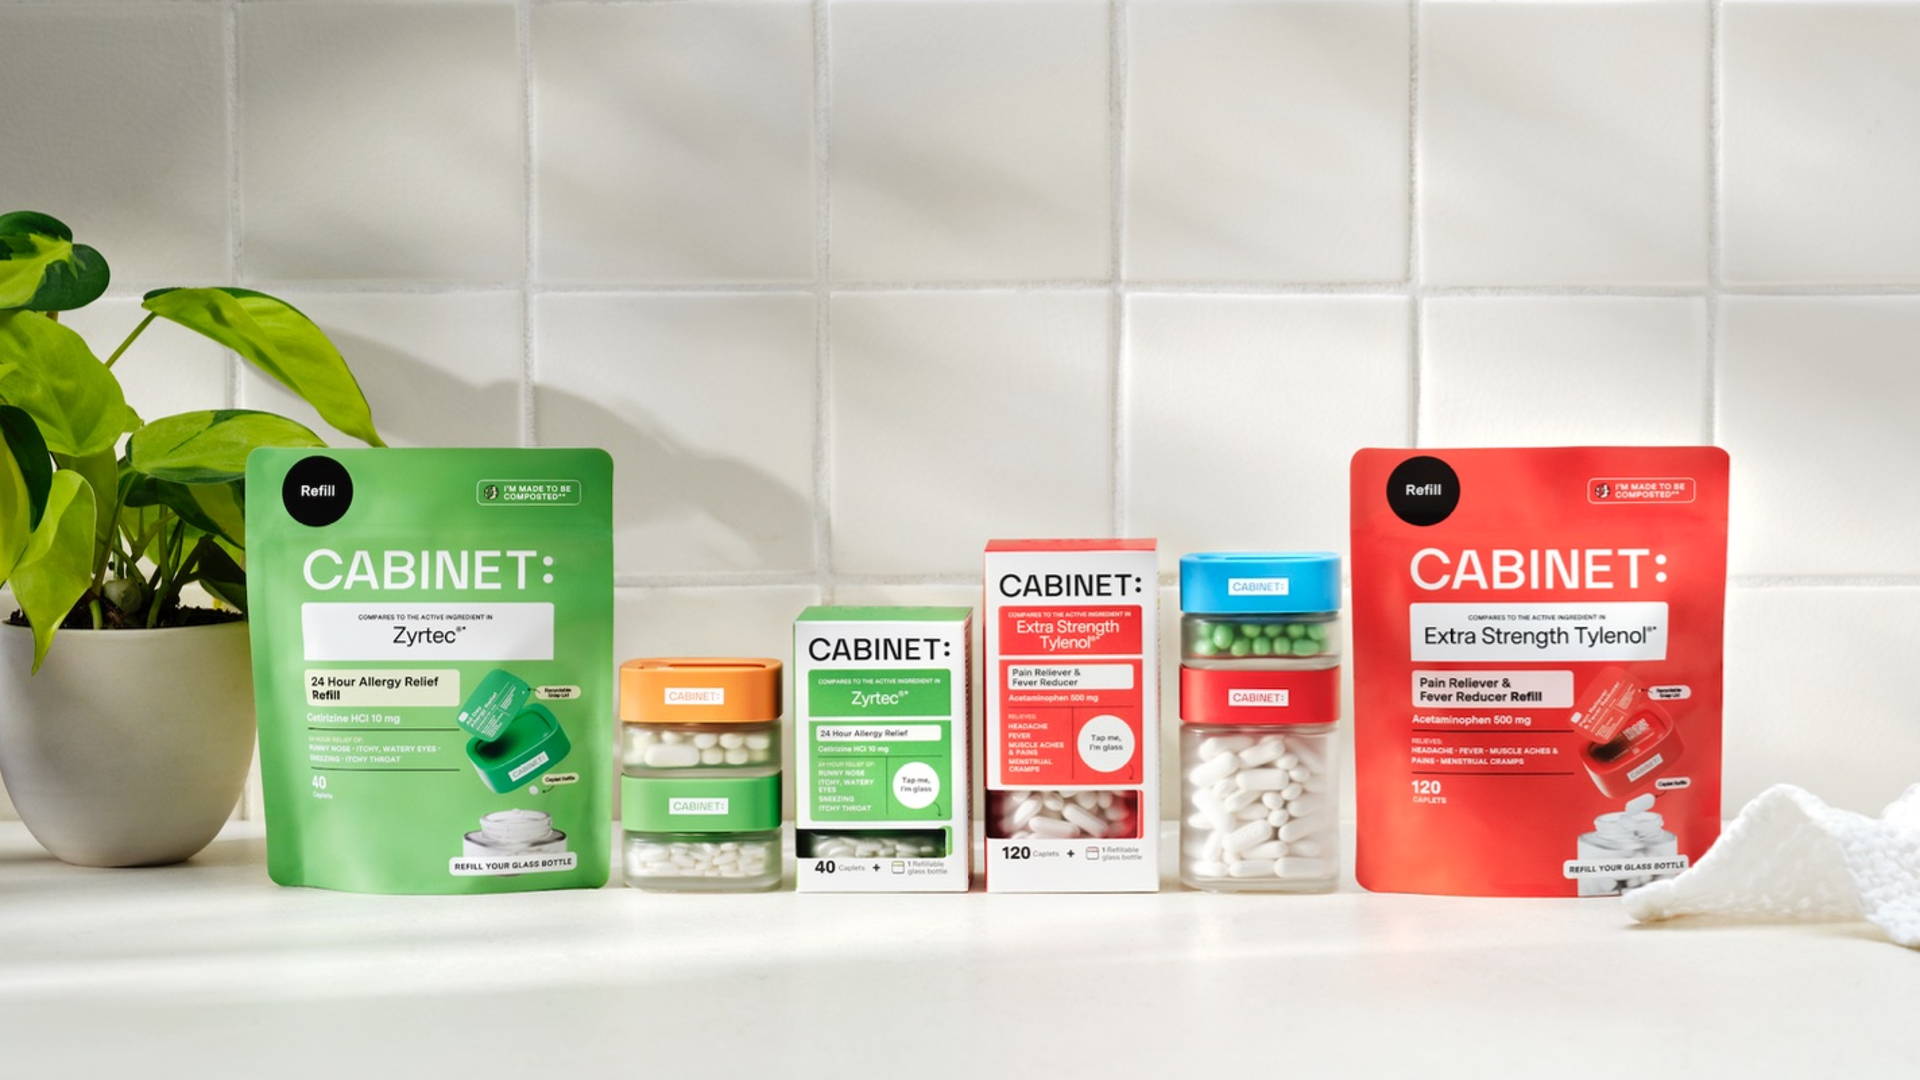 Featured image for OTC Healthcare Brand Cabinet Brings Its Sustainable Mission to Target (And With an Instructive Packaging Refresh)